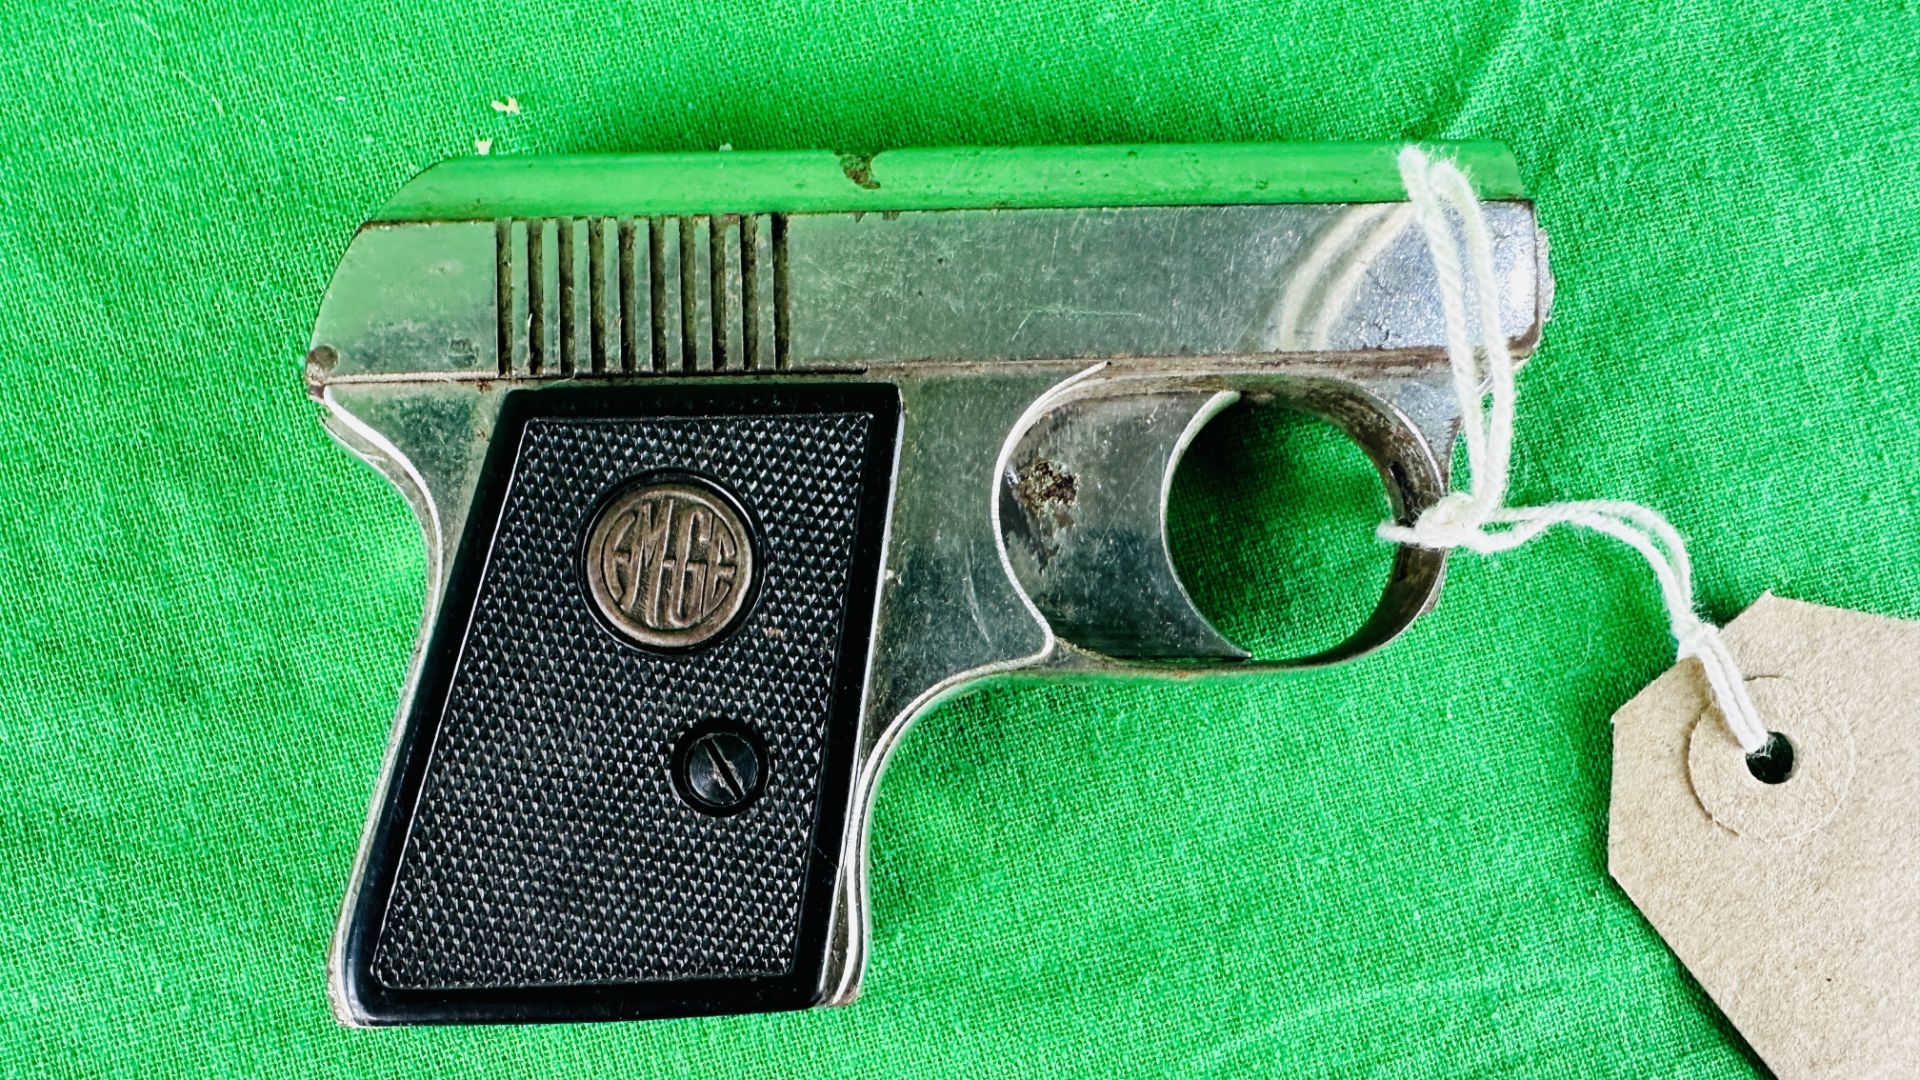 AN EMGE STARTING PISTOL COMPLETE WITH PART TUB OF BLANK CARTRIDGES - (ALL GUNS TO BE INSPECTED AND - Image 4 of 6